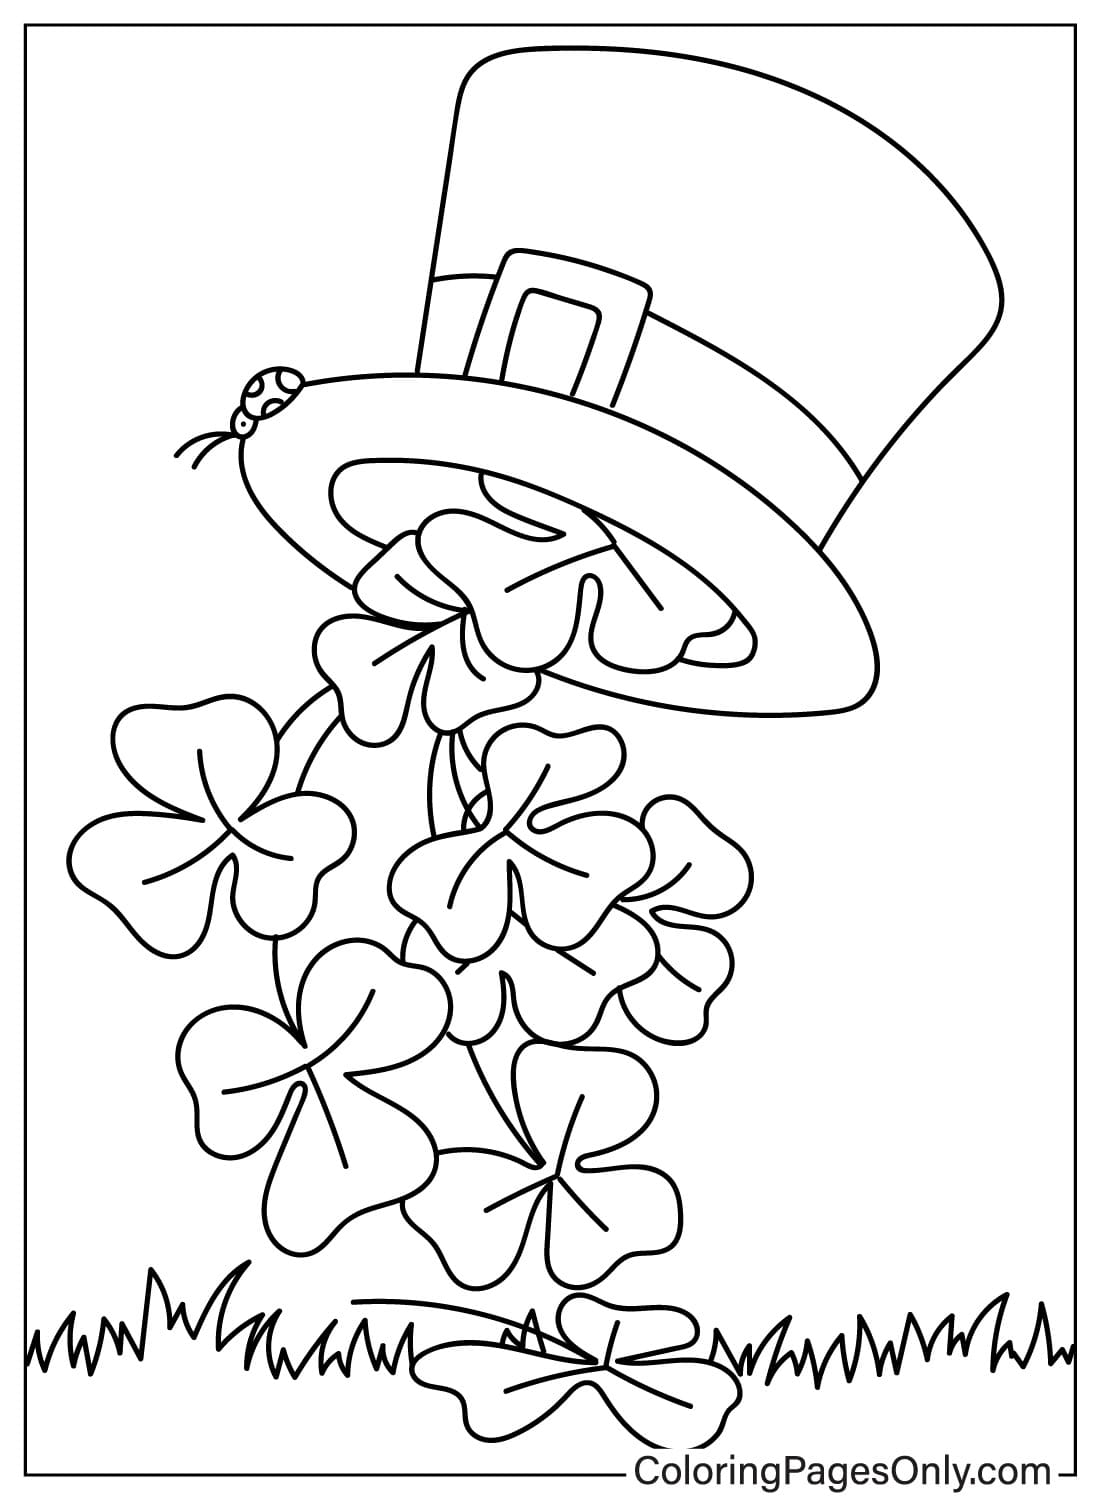 33 Shamrock Coloring Pages - ColoringPagesOnly.com